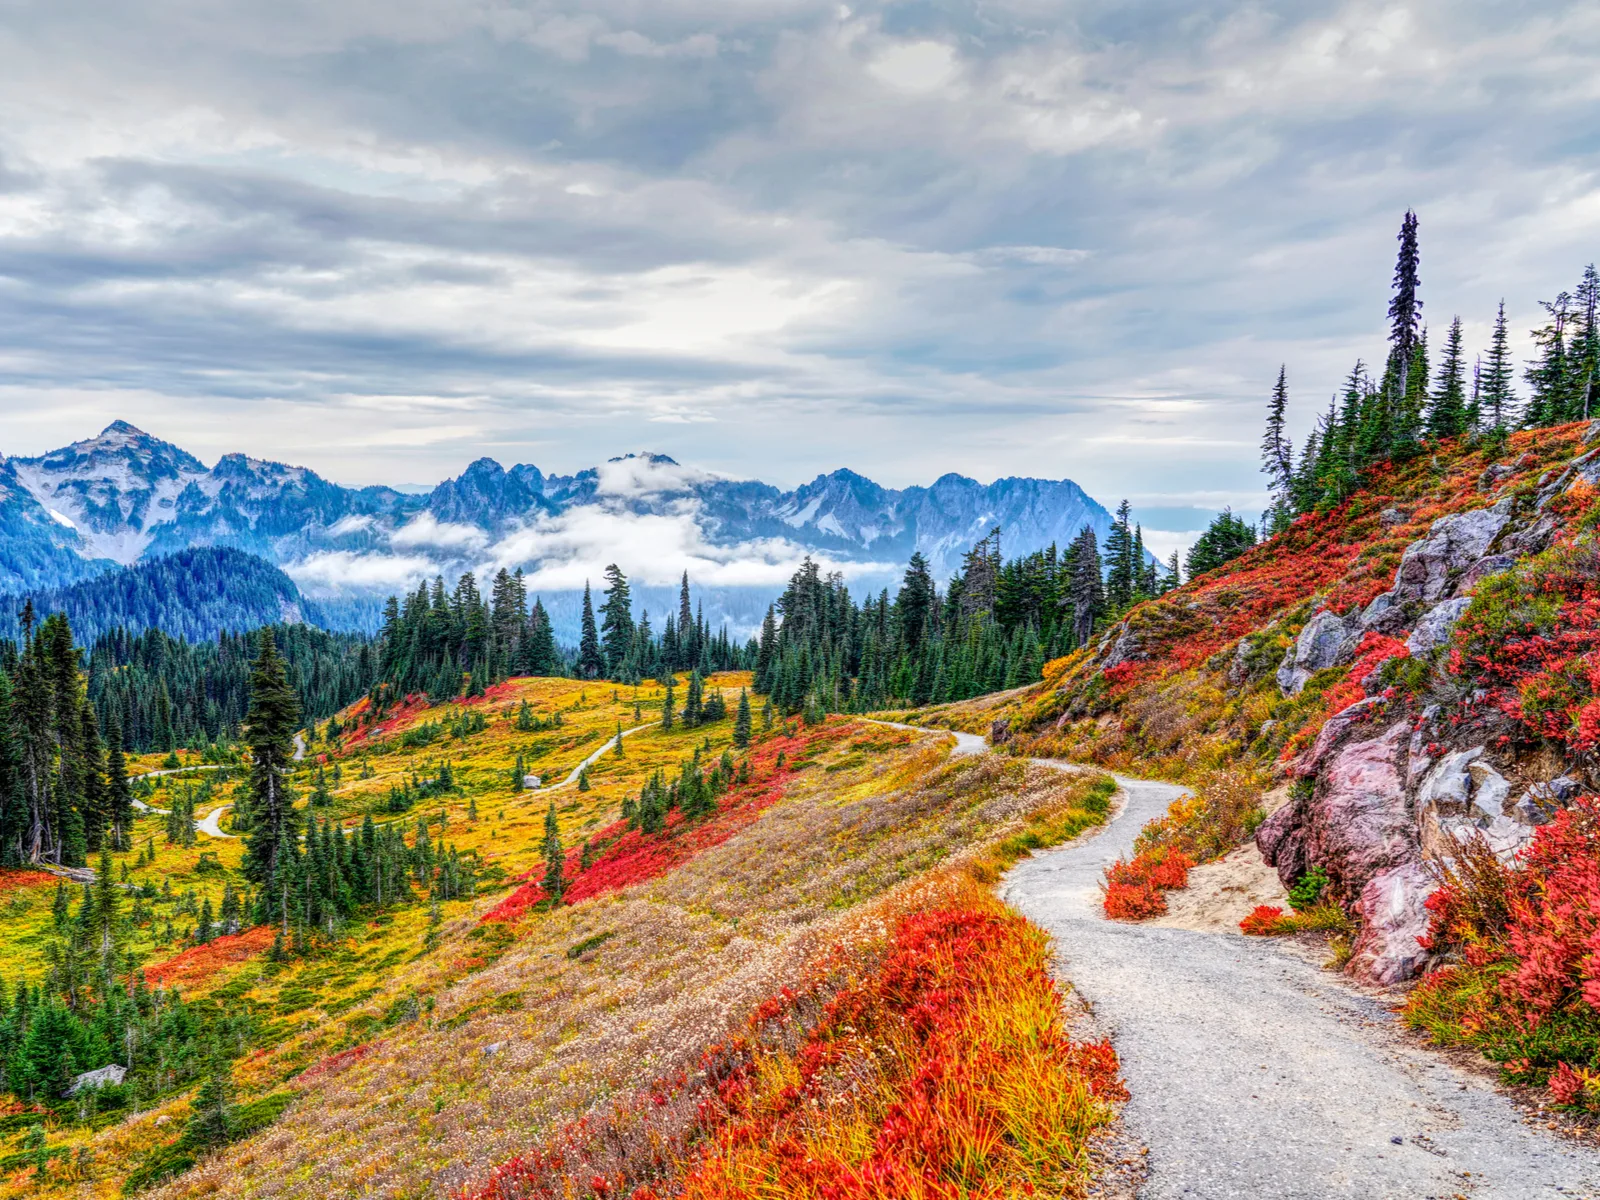 Gorgeous fall views in Mount Rainier National Park, one of the best places to visit in Washington State, as seen from a hiking trail